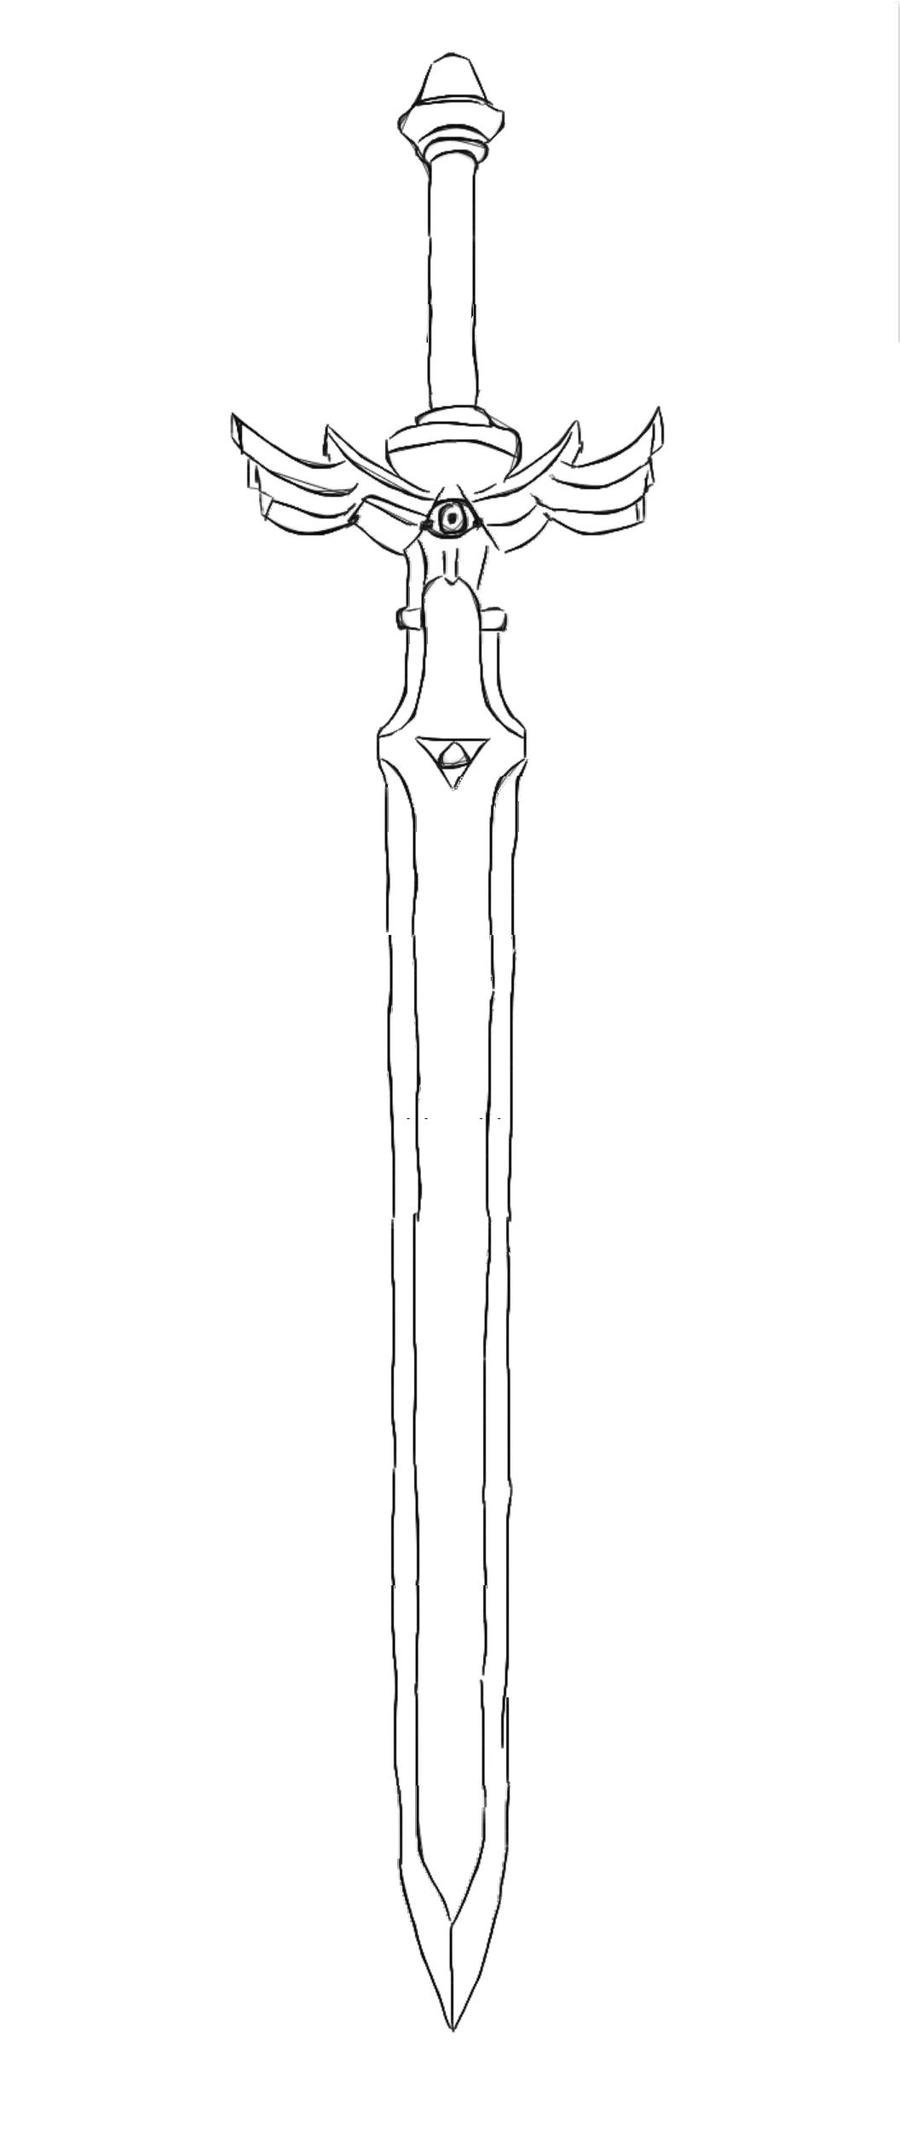 zelda sword in the stone coloring pages - photo #30